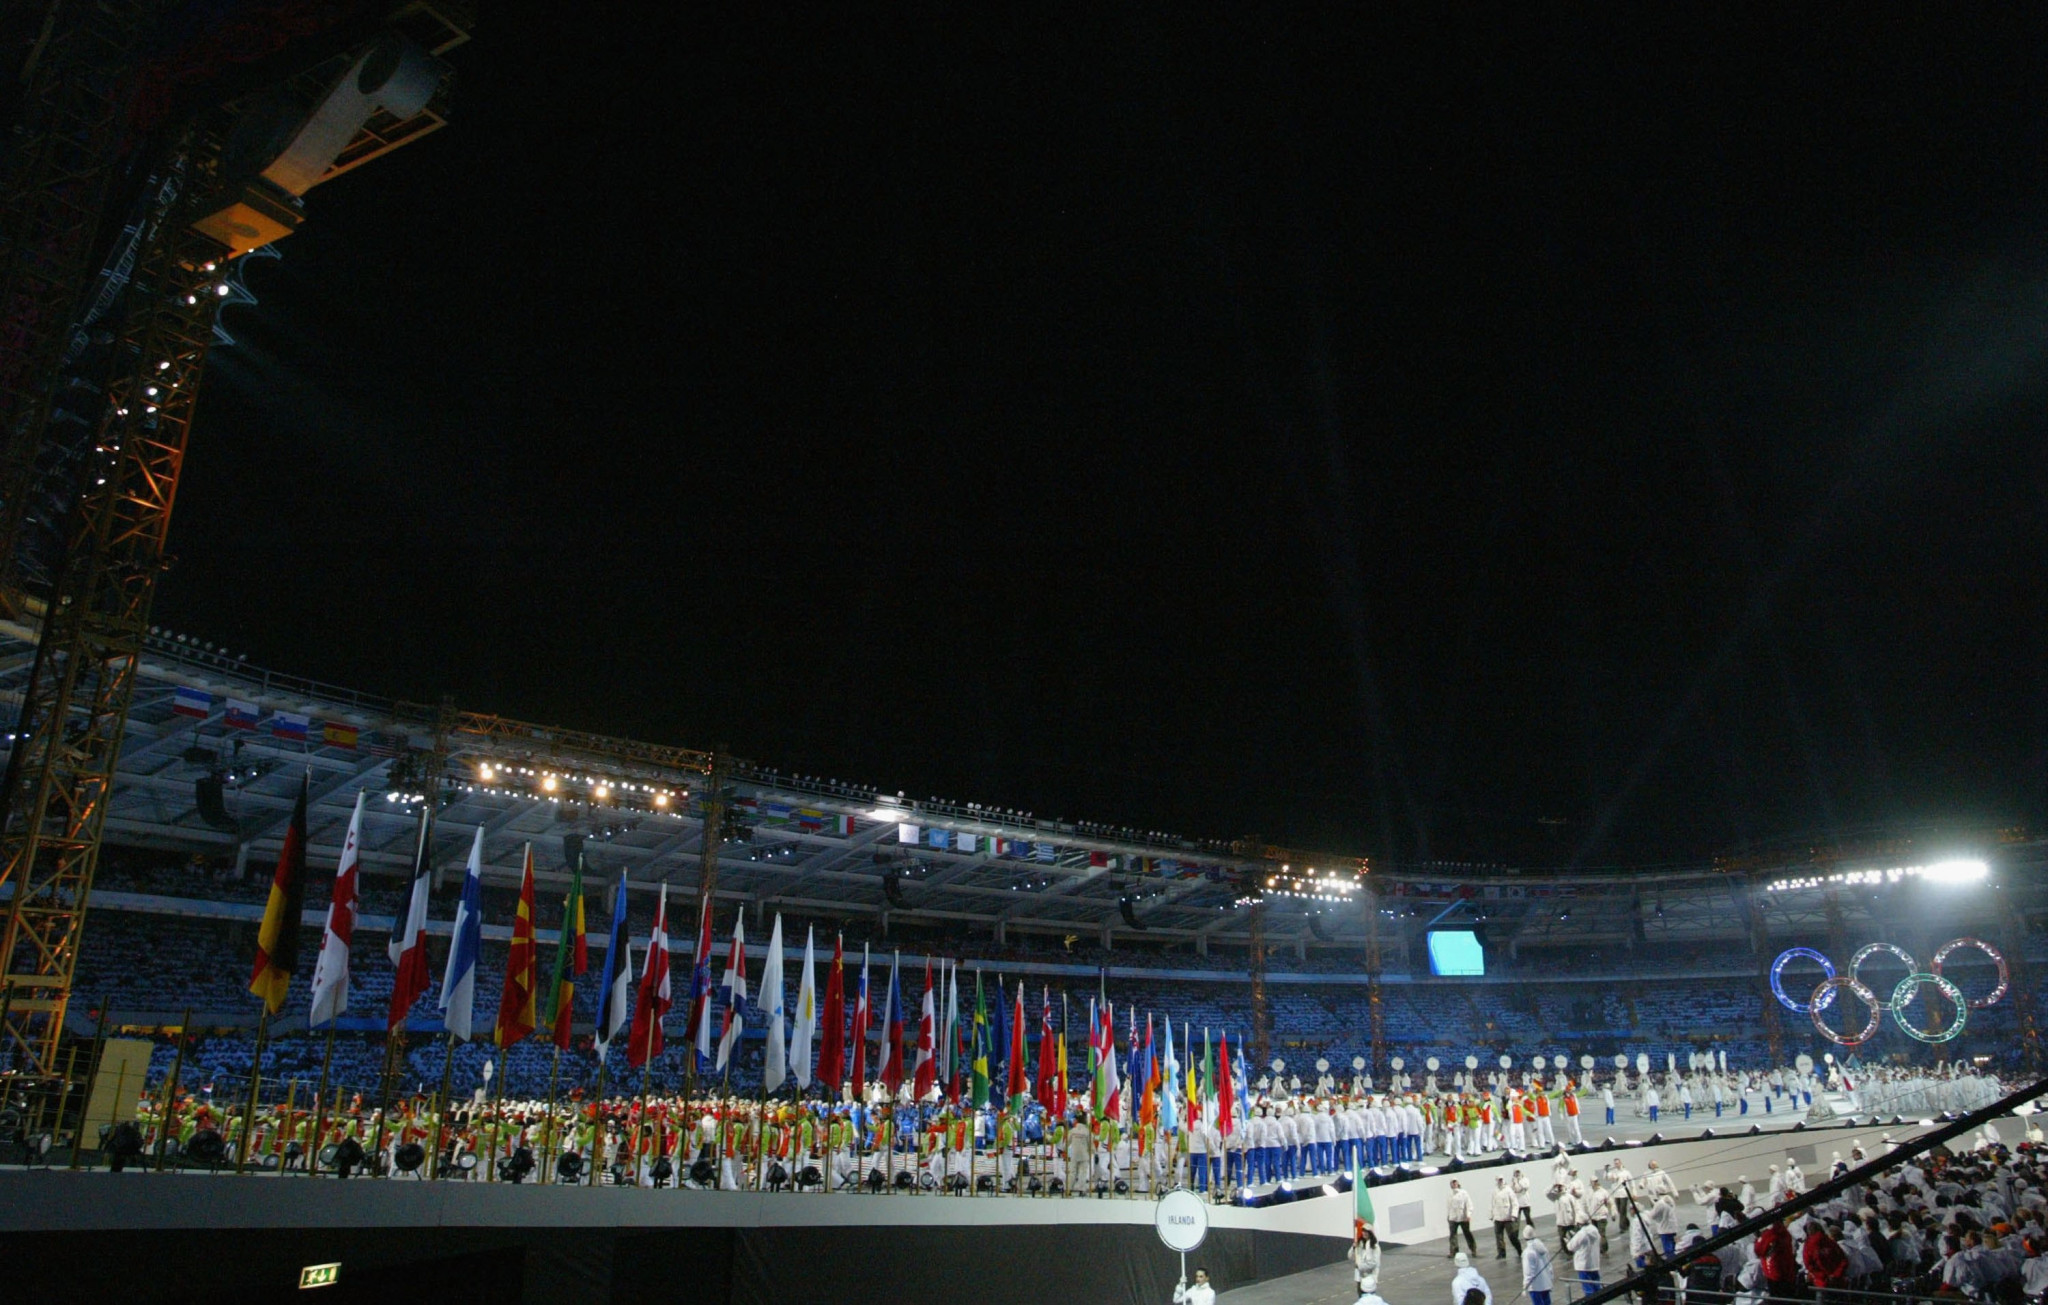 Balich Worldwide have produced shows including the Opening Ceremony of the 2006 Winter Olympics in Turin ©Getty Images